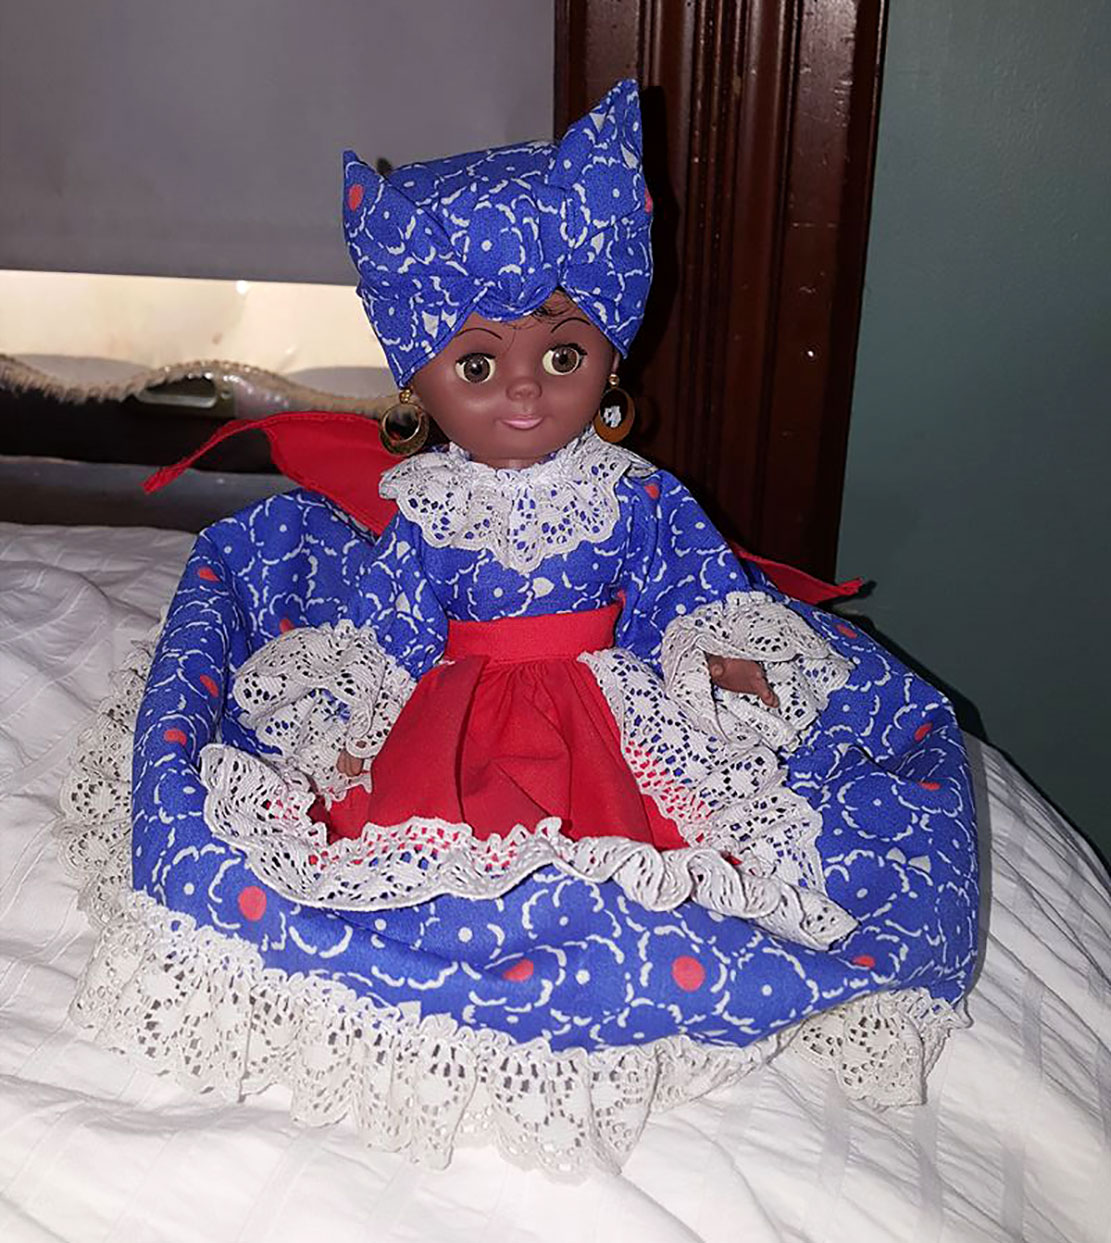 Candelo found this beautiful doll at one of the Denver Thrift Shops photo by Candelo Kimbisa